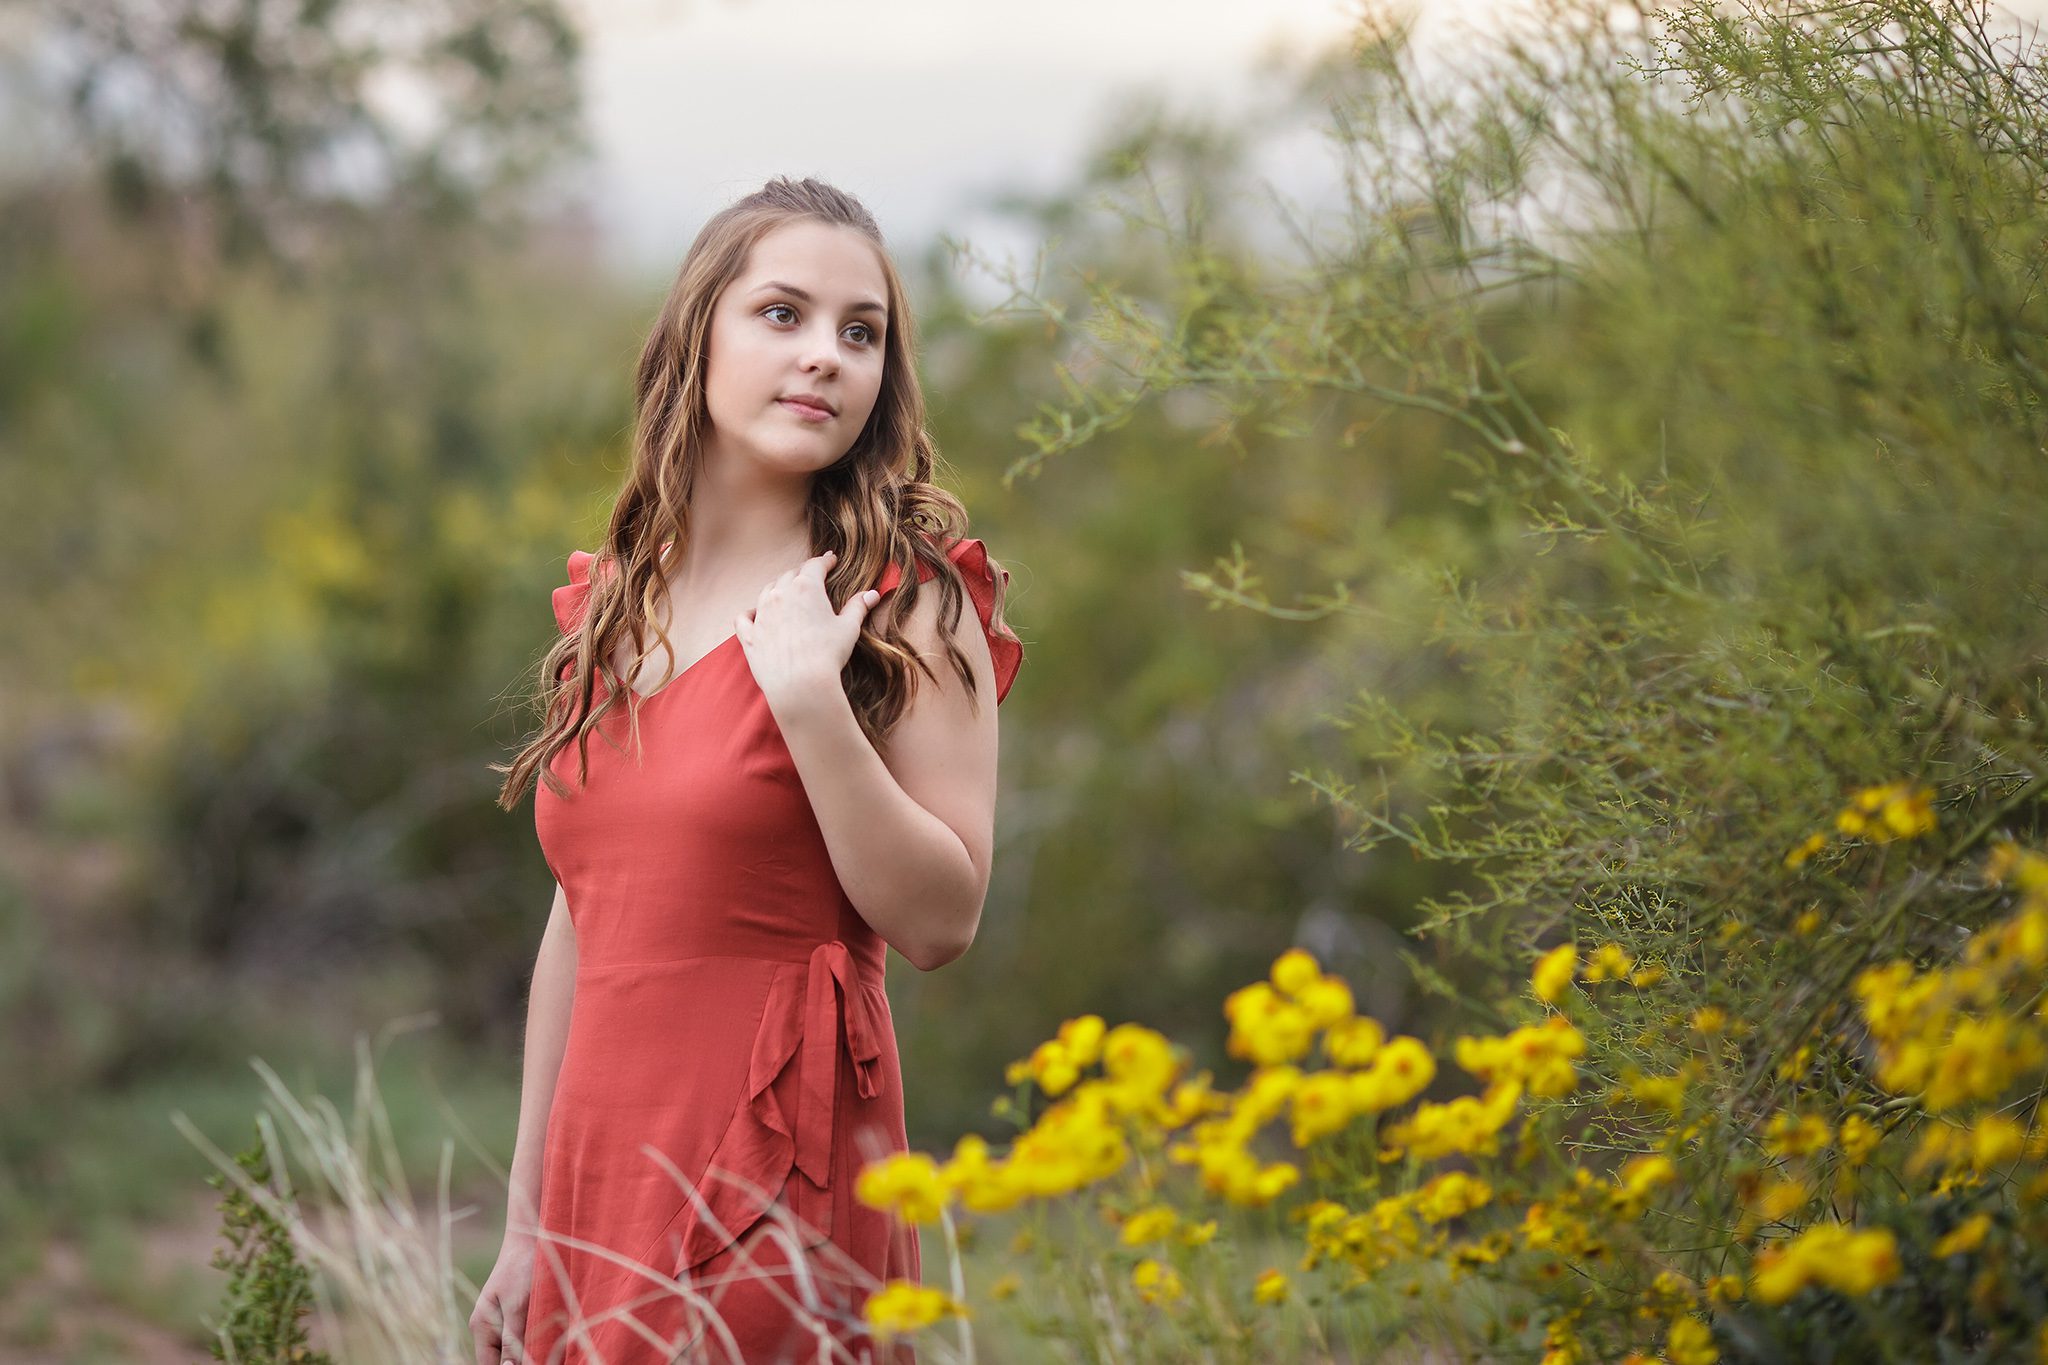 Senior picture spring looks with flowers and trees in Phoenix